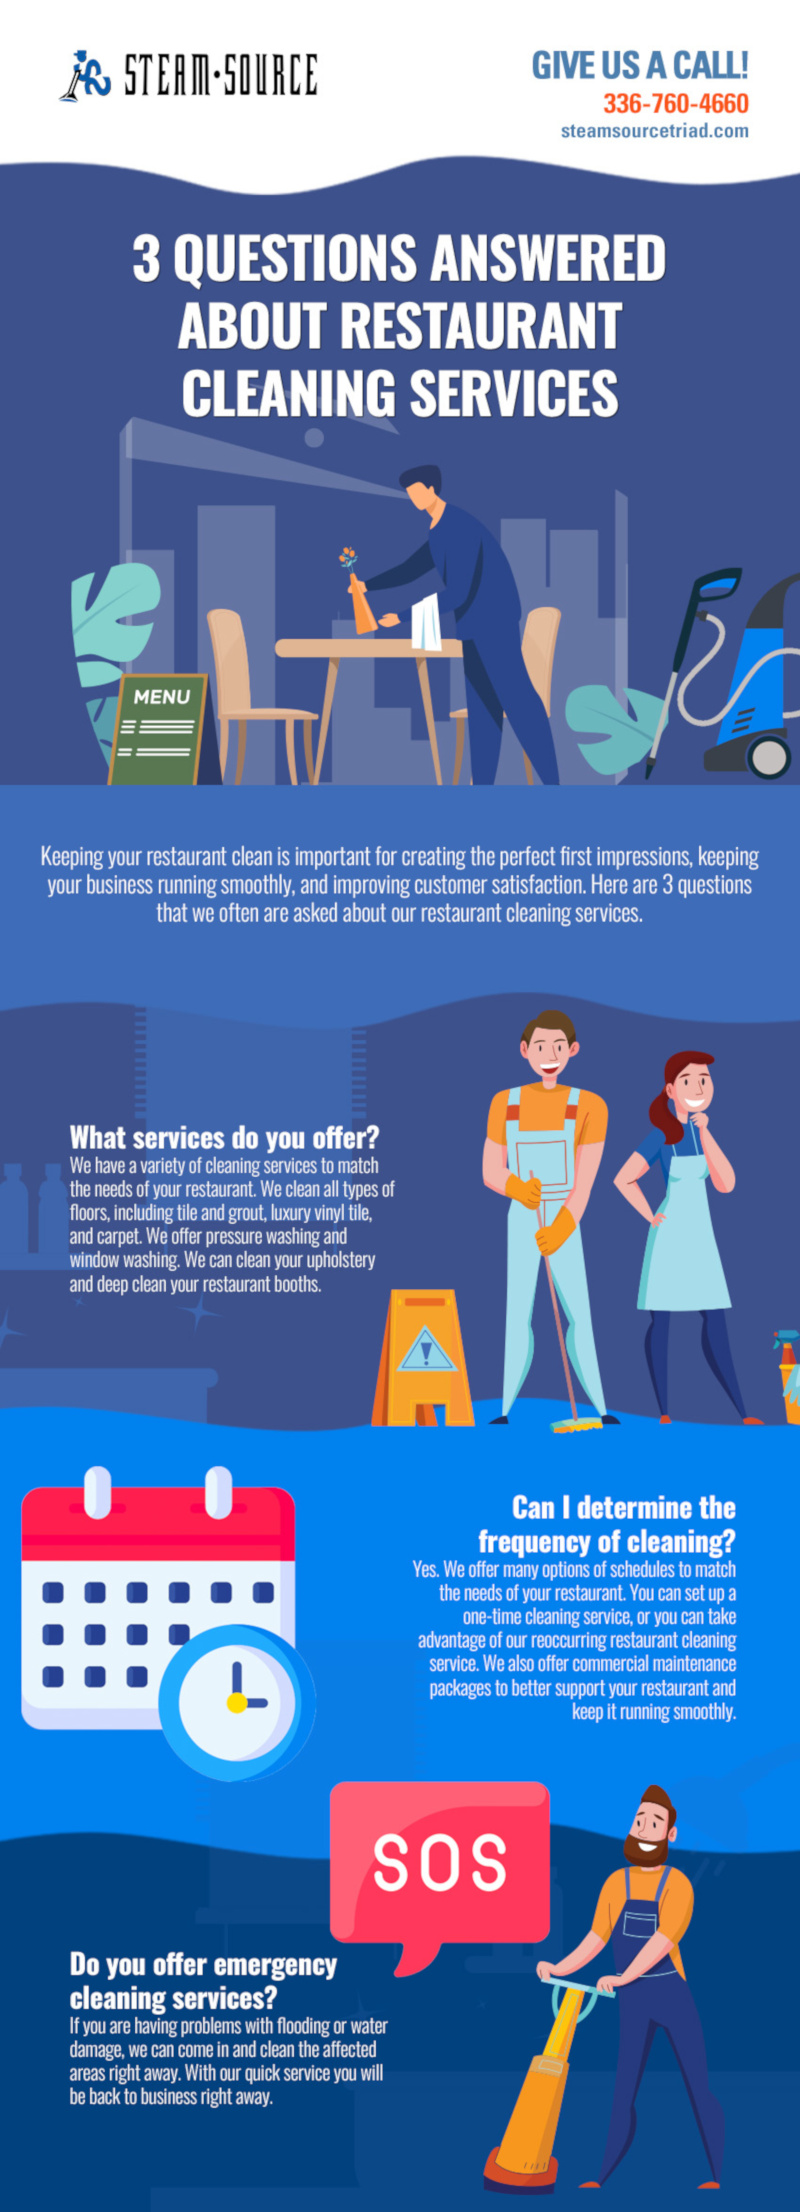 3 Questions Answered About Restaurant Cleaning Services [infographic]